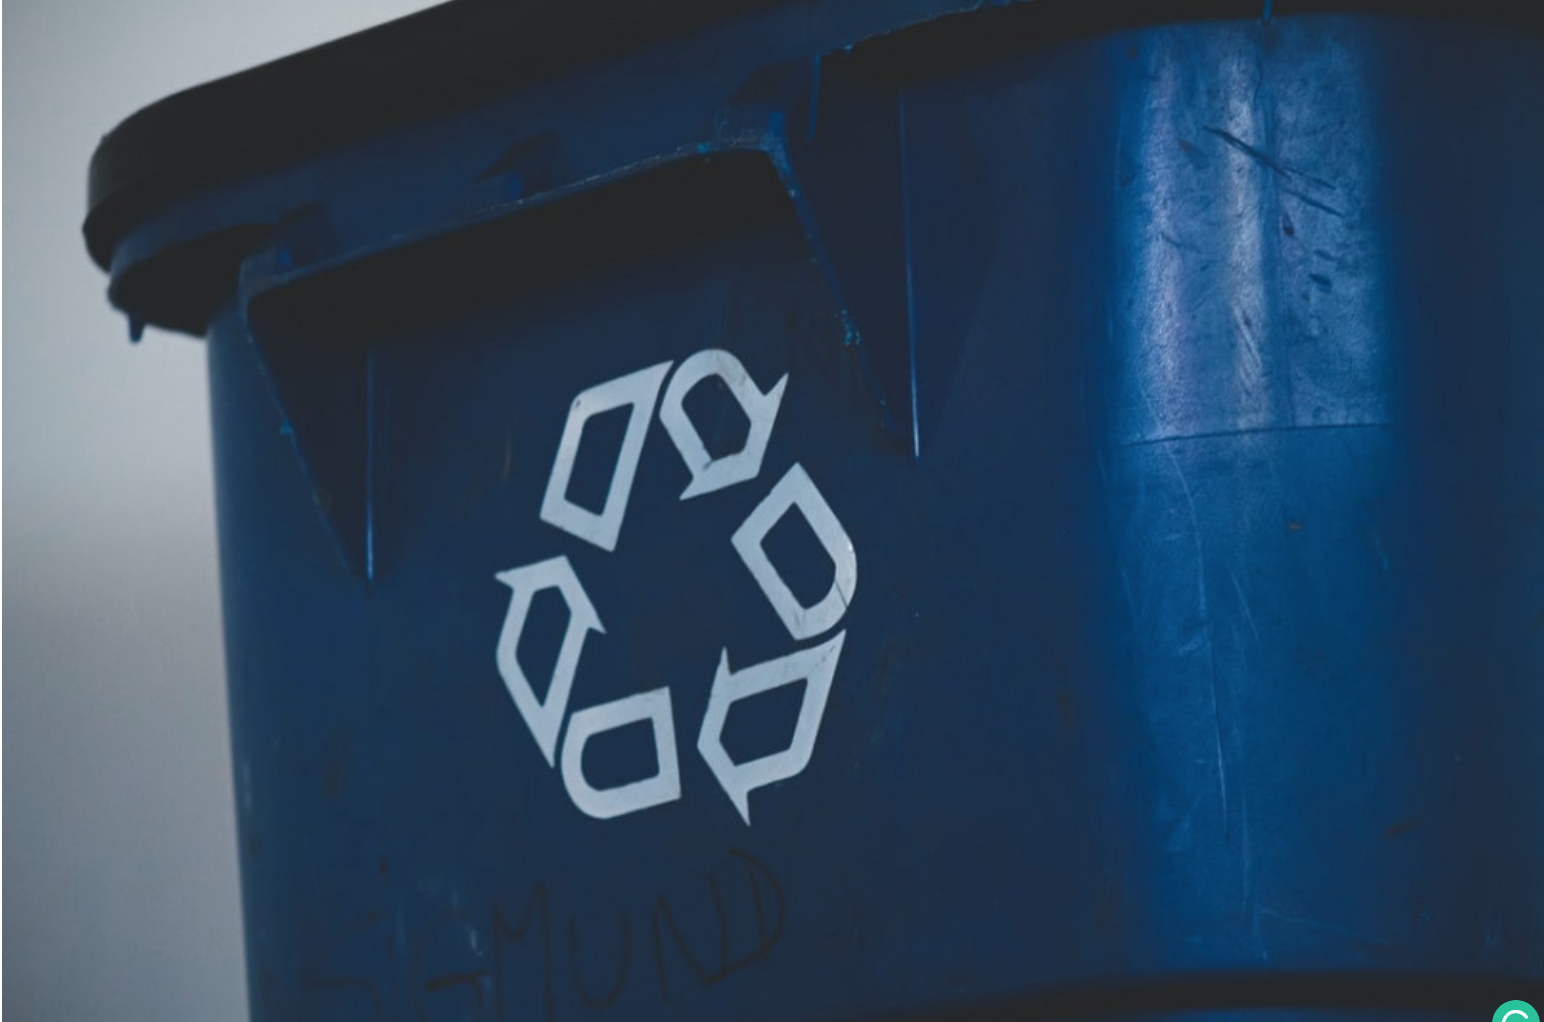 Why is recycling so difficult? - Recycling Trash Can